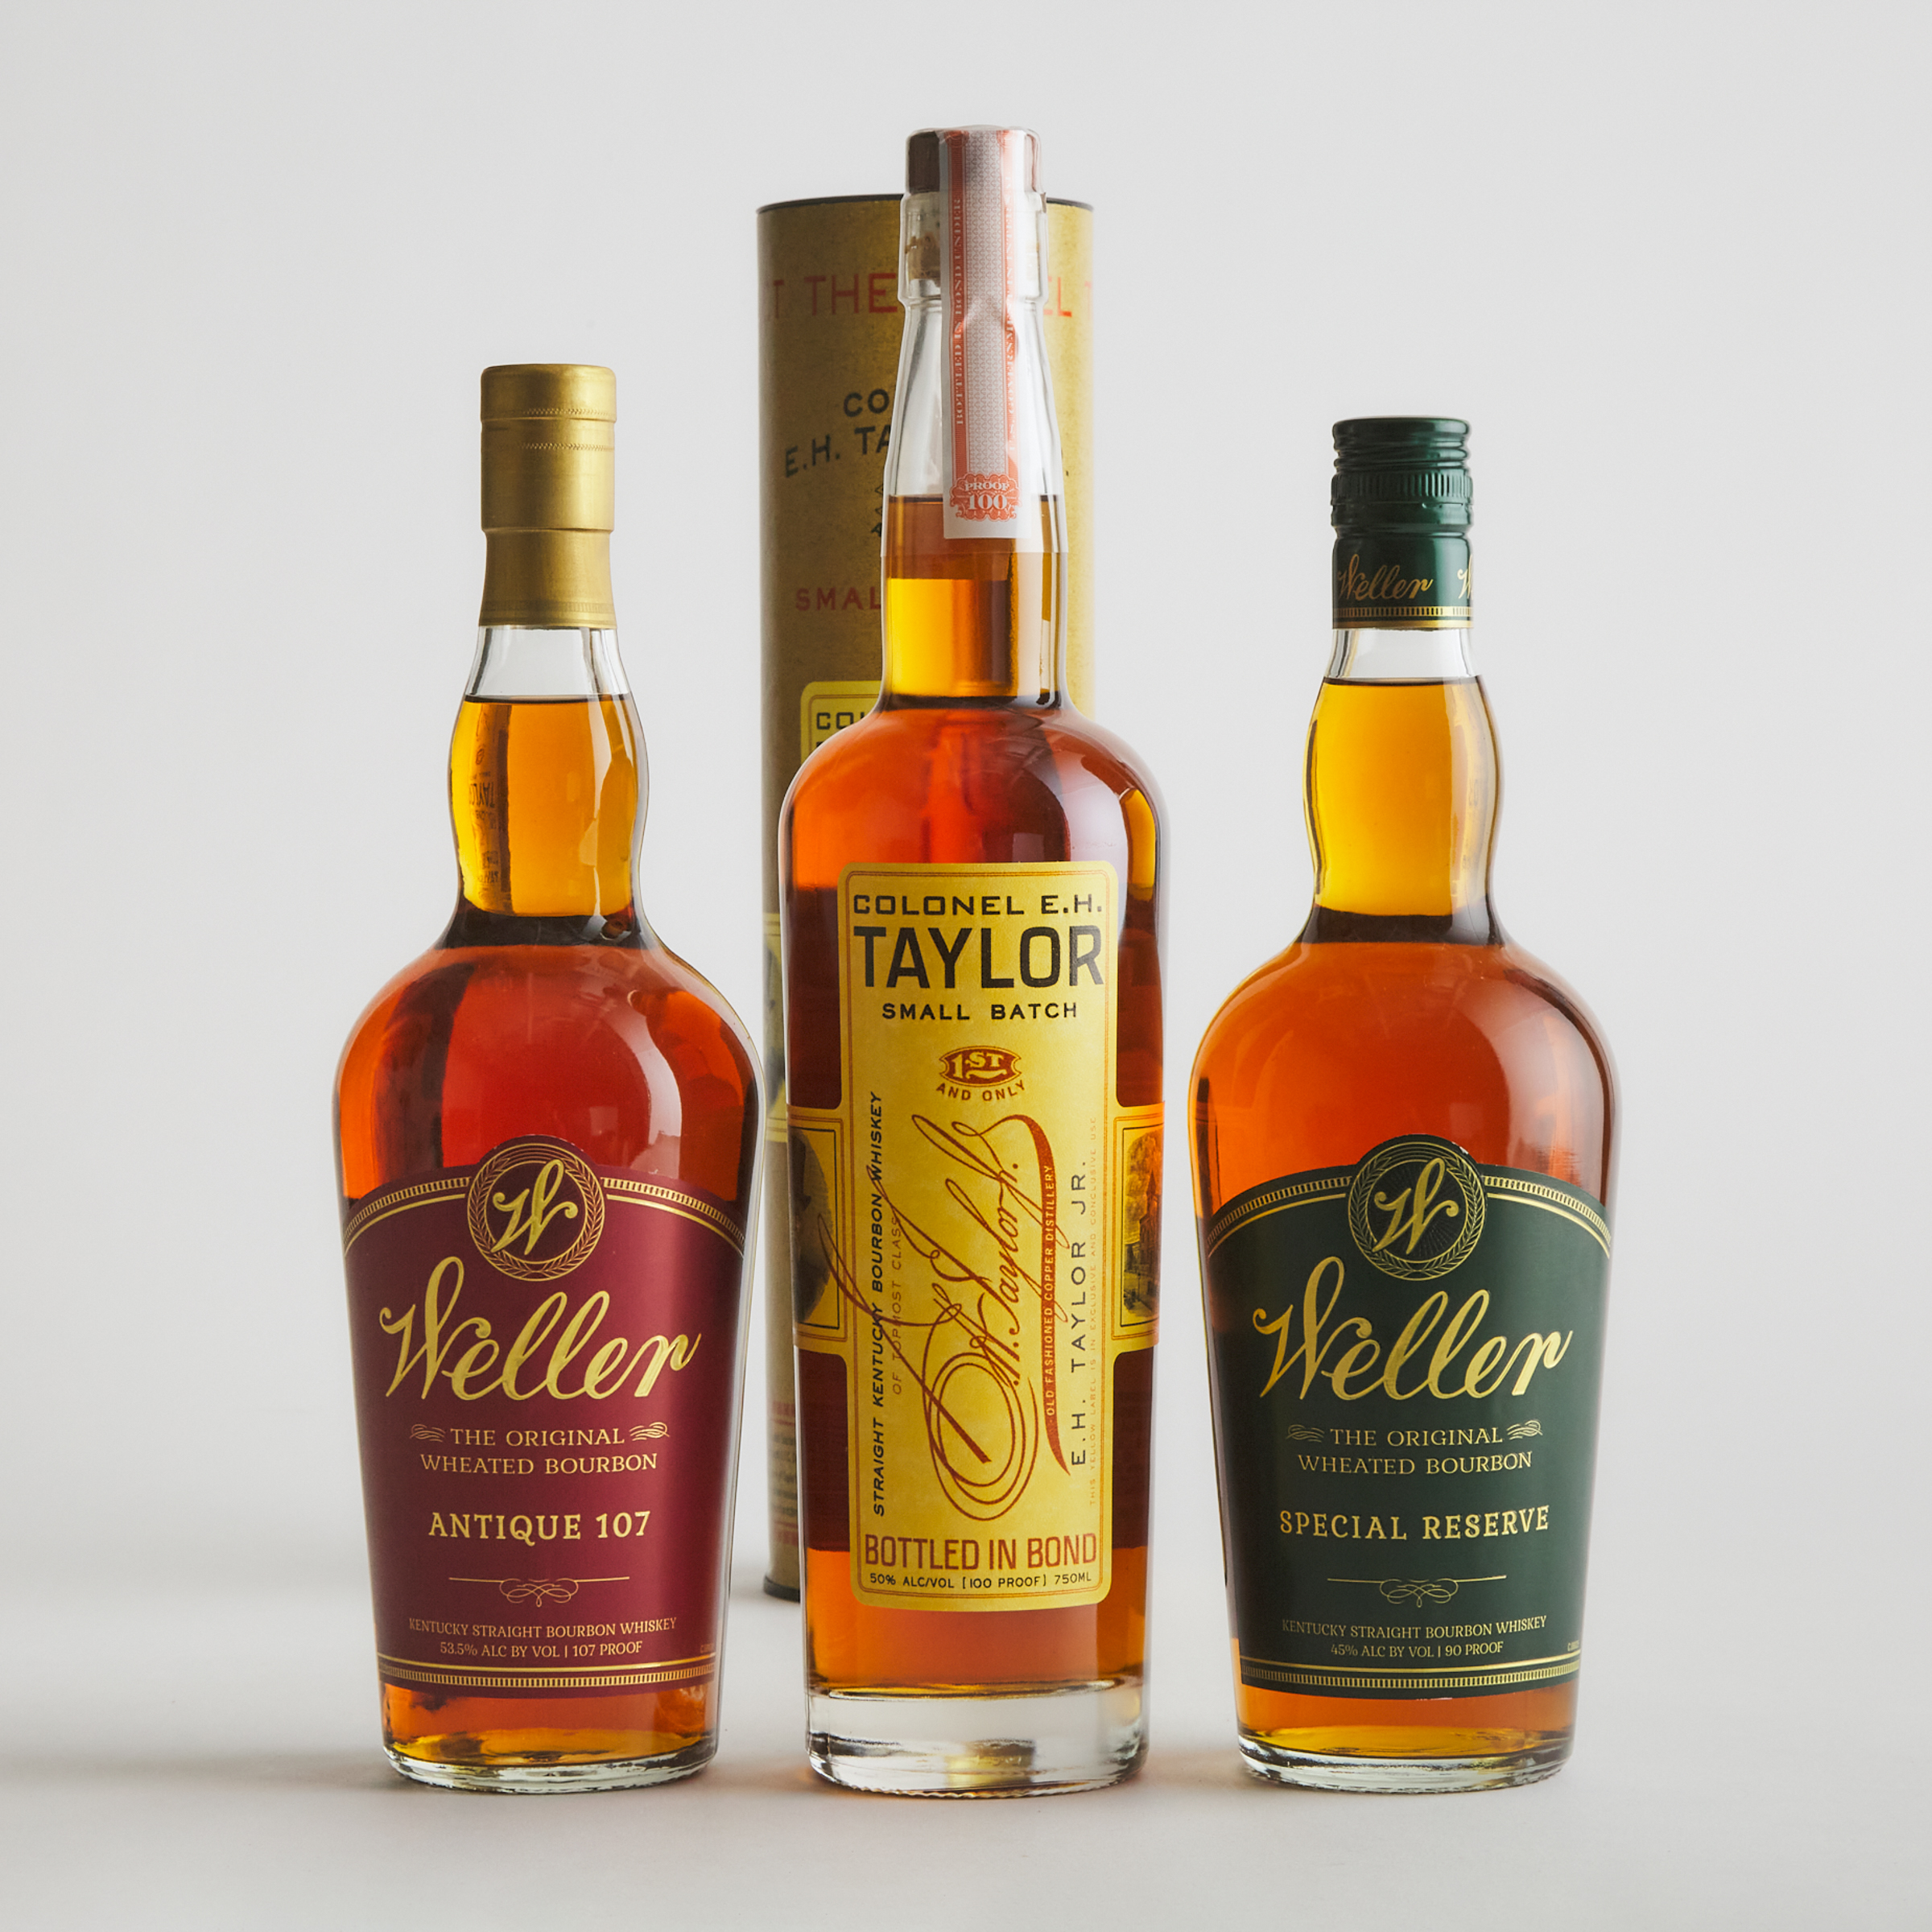 COLONEL E.H. TAYLOR SMALL BATCH STRAIGHT KENTUCKY BOURBON WHISKEY (ONE 750 ML)
WELLER ANTIQUE 107 KENTUCKY STRAIGHT WHEATED BOURBON WHISKEY (ONE 750 ML)
WELLER SPECIAL RESERVE KENTUCKY STRAIGHT BOURBON WHISKEY (ONE 750 ML)